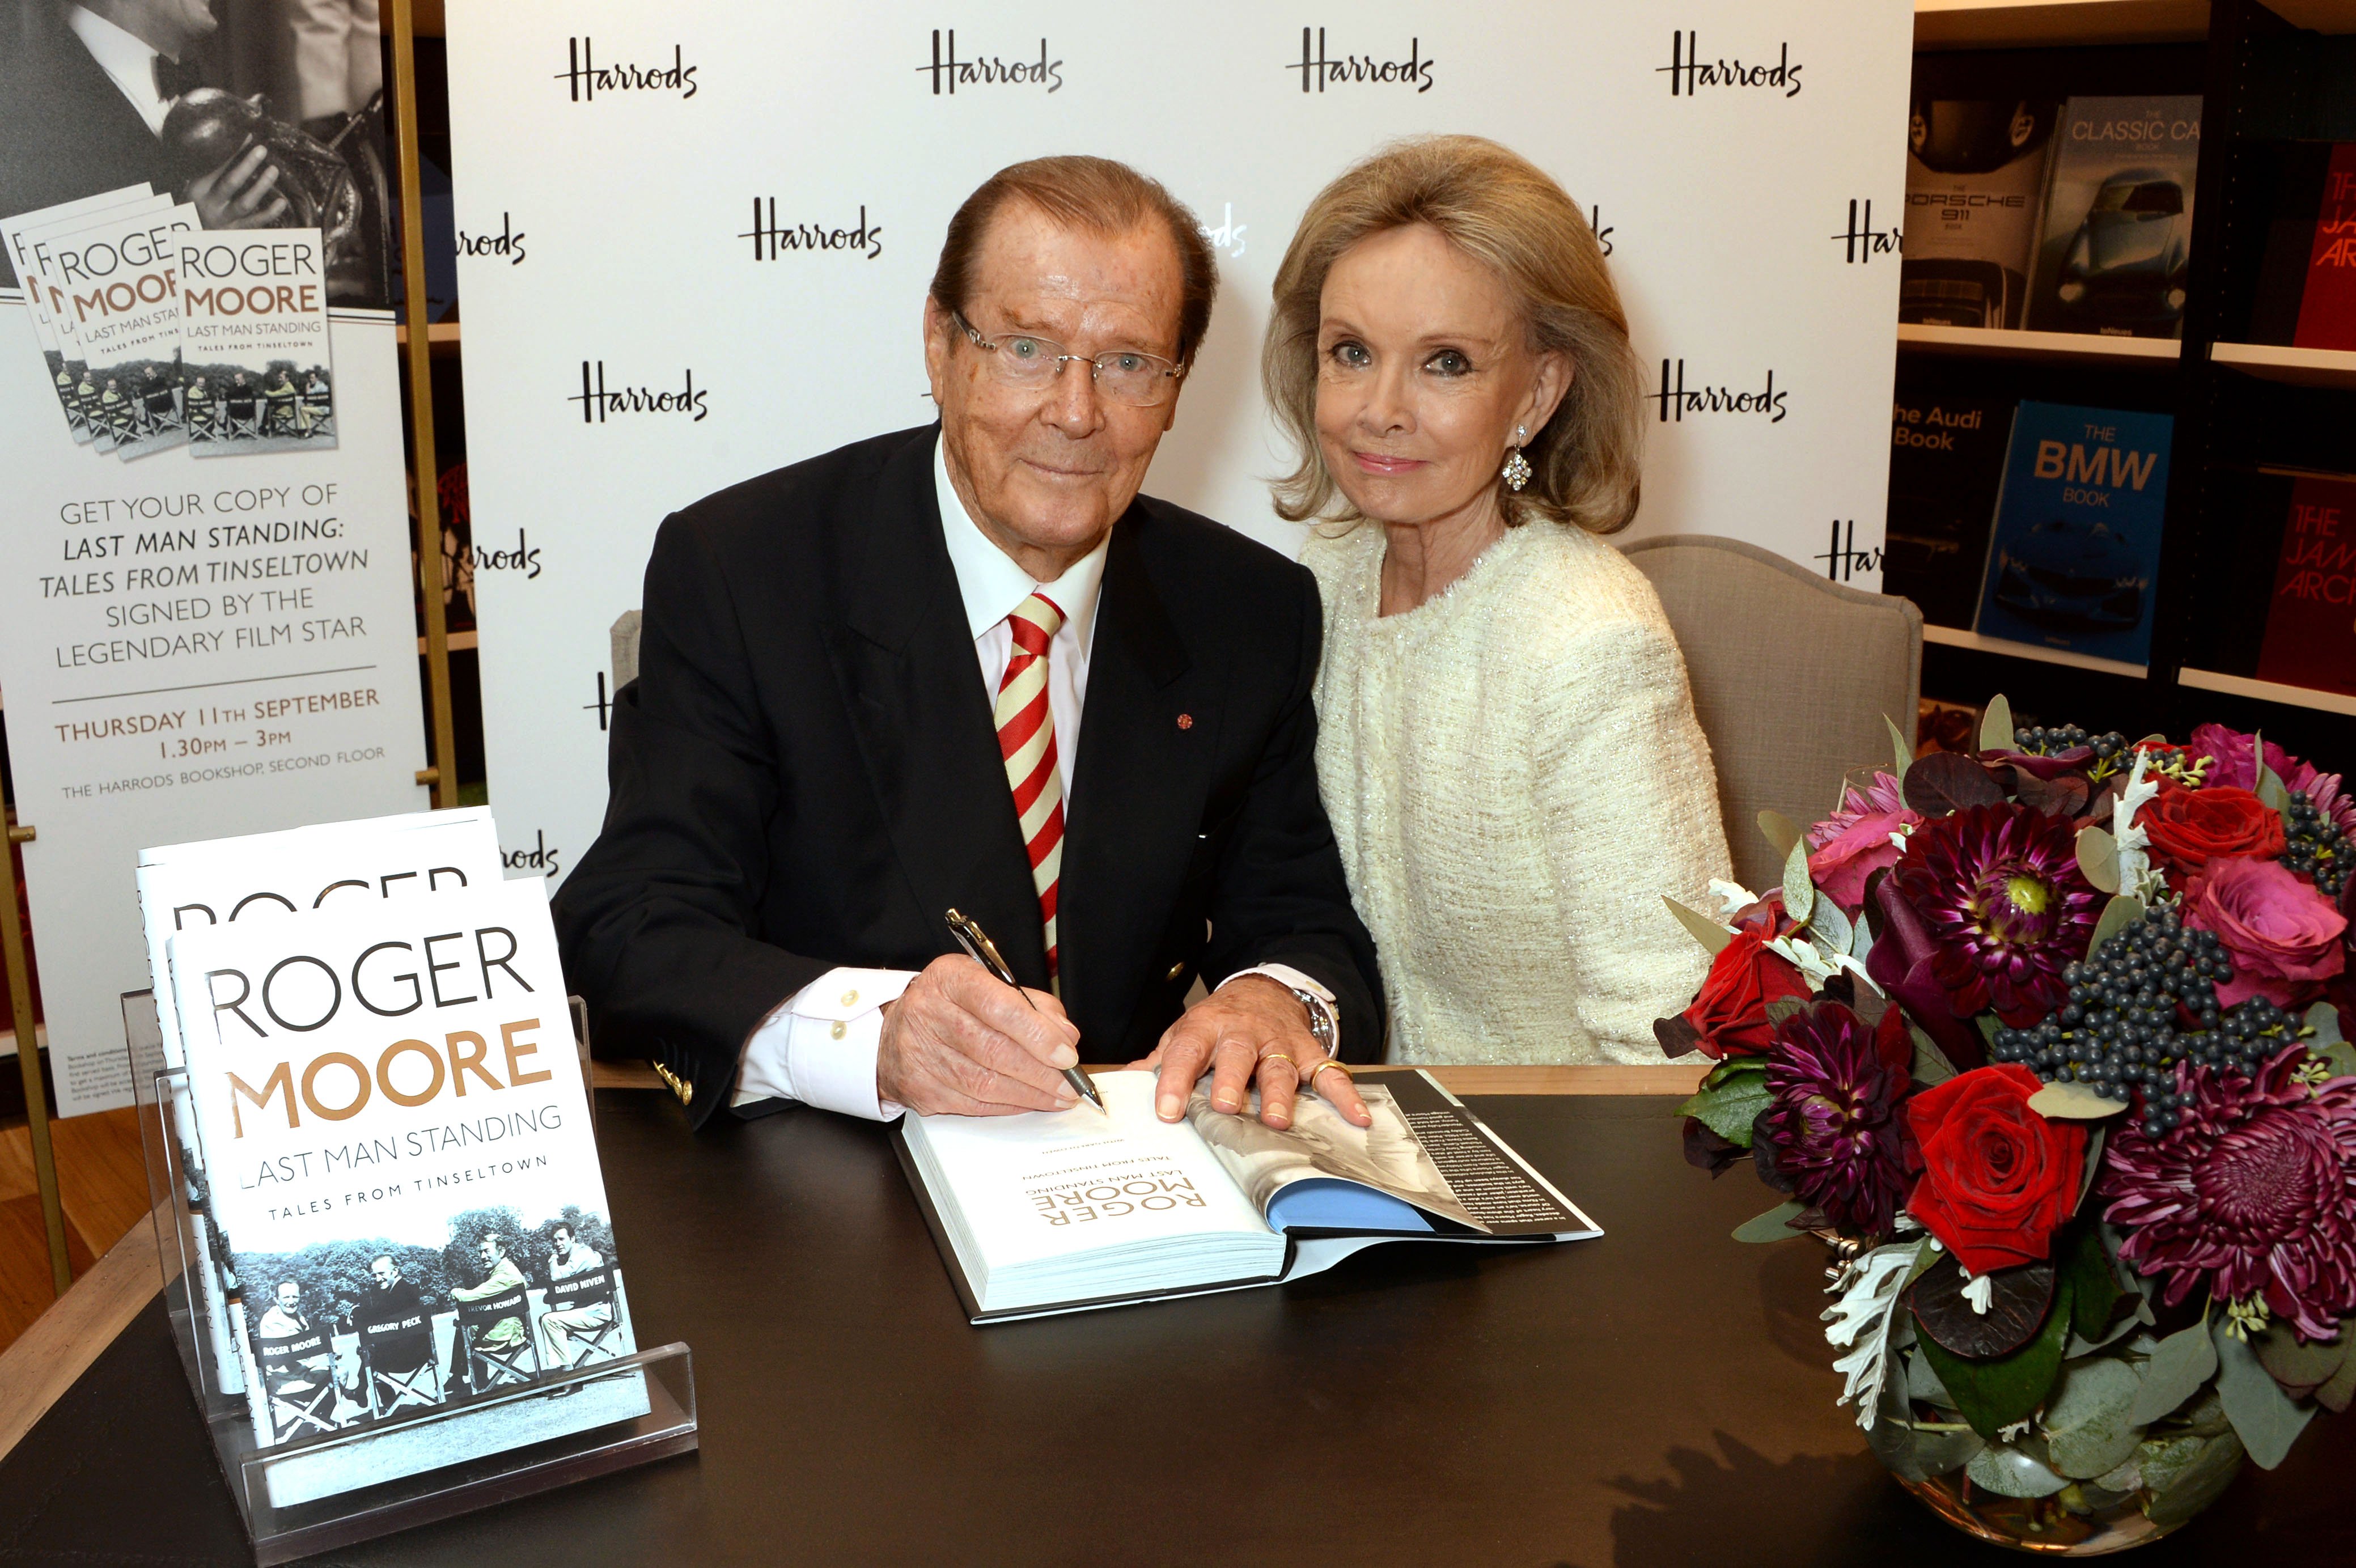 Roger Moore signs copies of his new book "Last Man Standing: Tales from Tinseltown" alongside wife Kristina Tholstrup at Harrods Bookshop on September 11, 2014 in London, England | Source: Getty Images